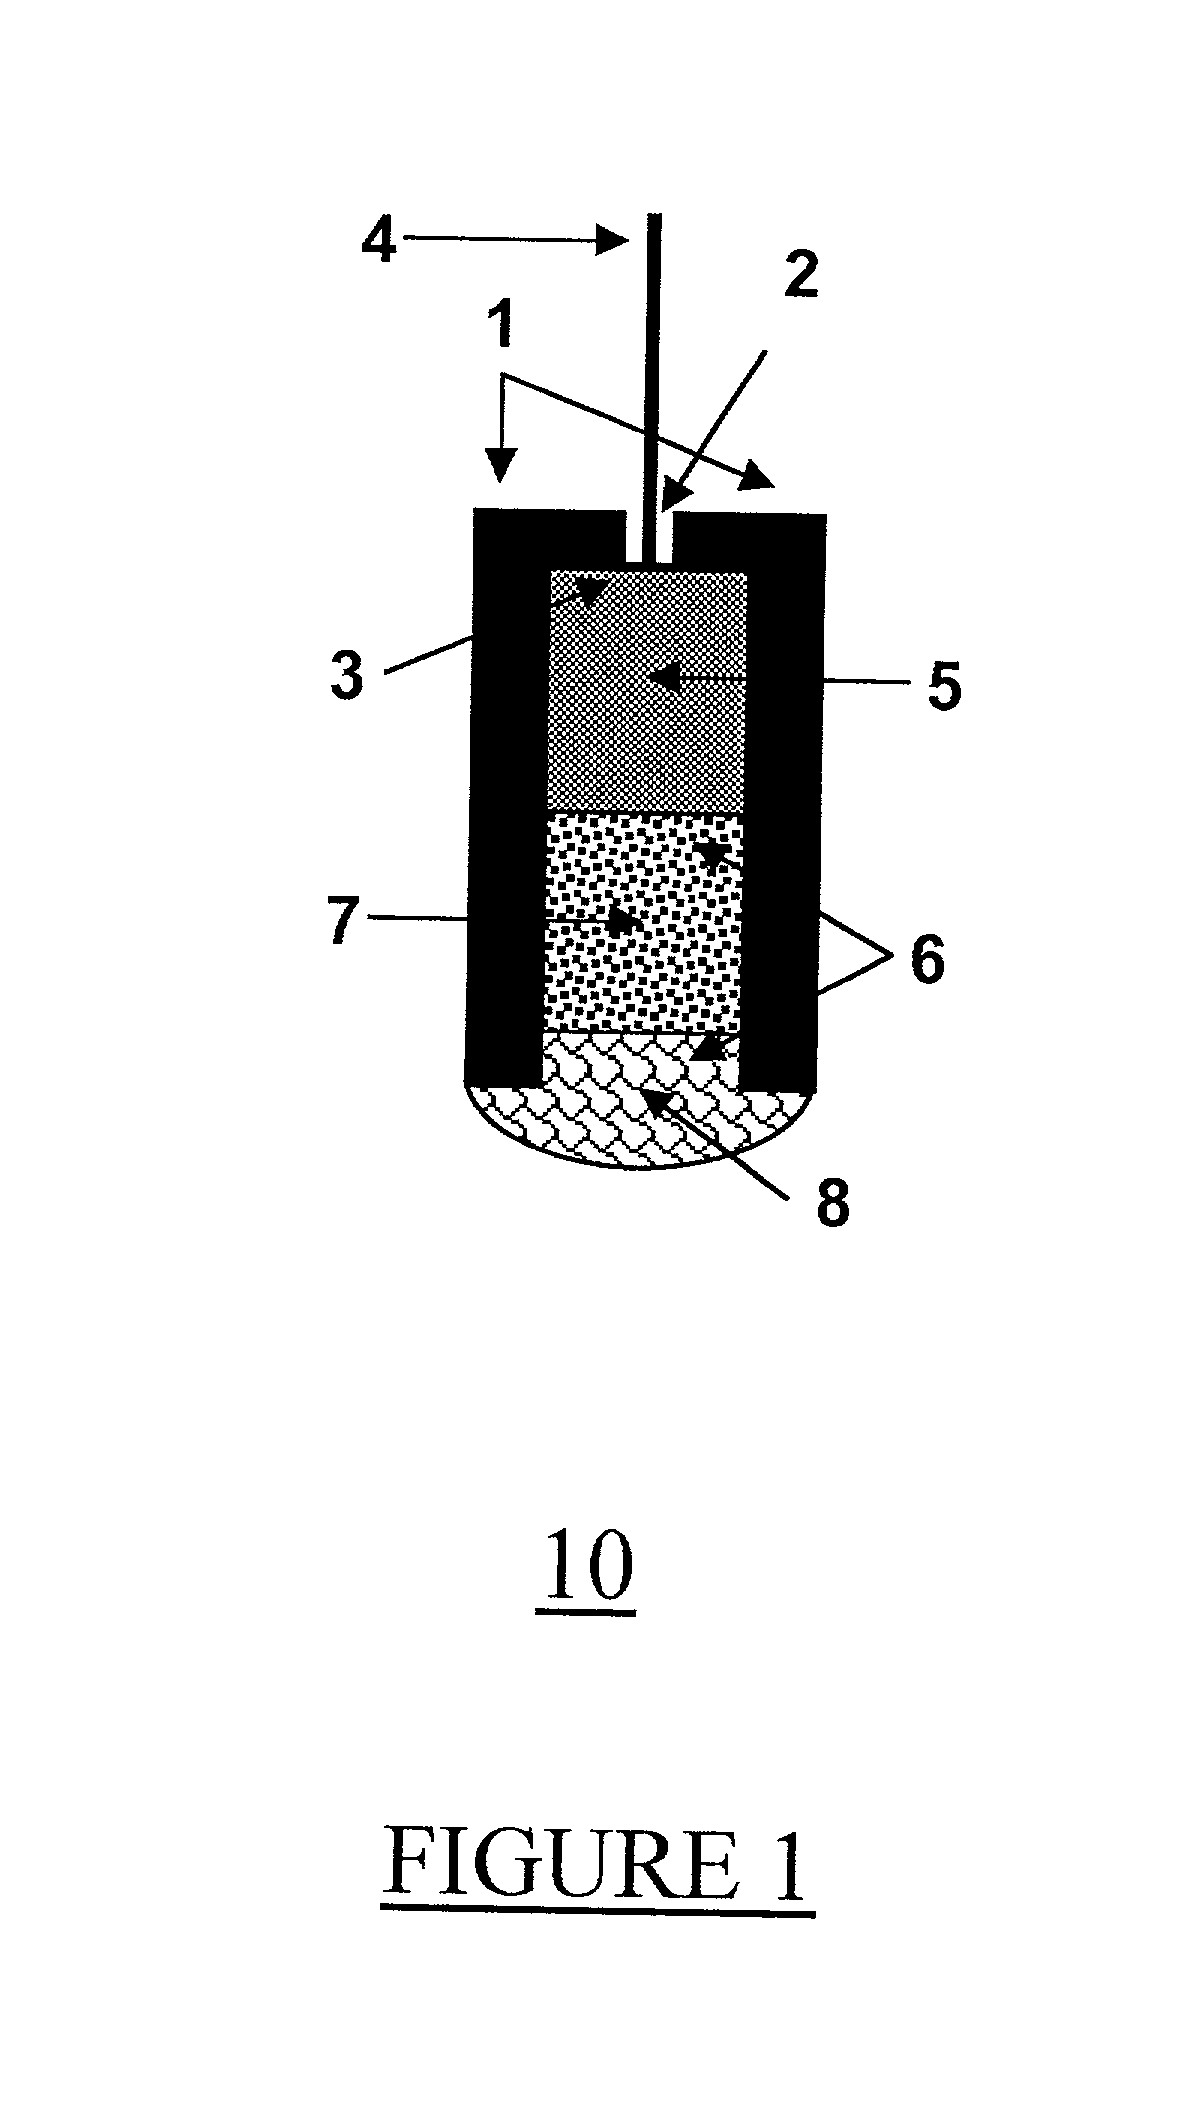 Solid-state ion selective electrodes and methods of producing the same